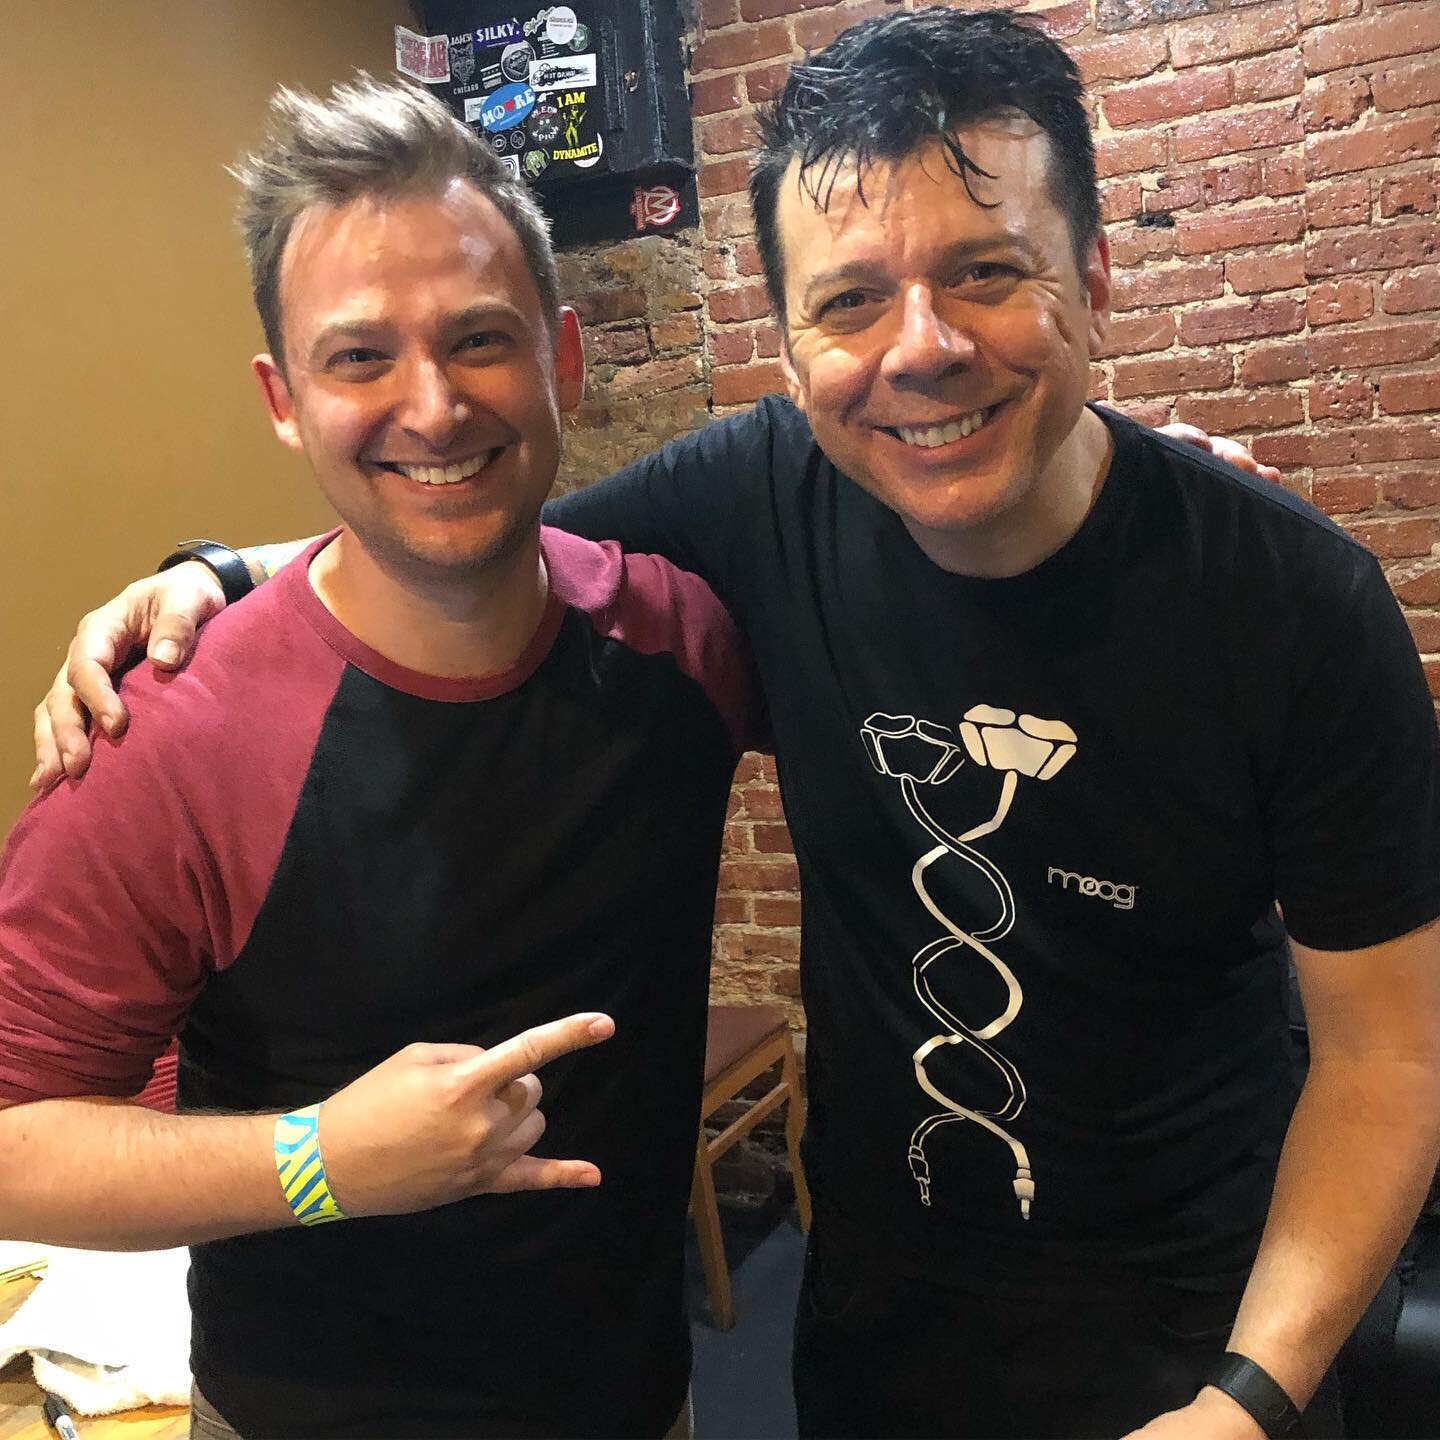 Getting to hang with Scott of @thecrystalmethod last night was an awesome experience. The Vegas album in 97 played a major part in inspiring me to pursue a career in DJing and music production. I don&rsquo;t know if I would be doing what I do today i